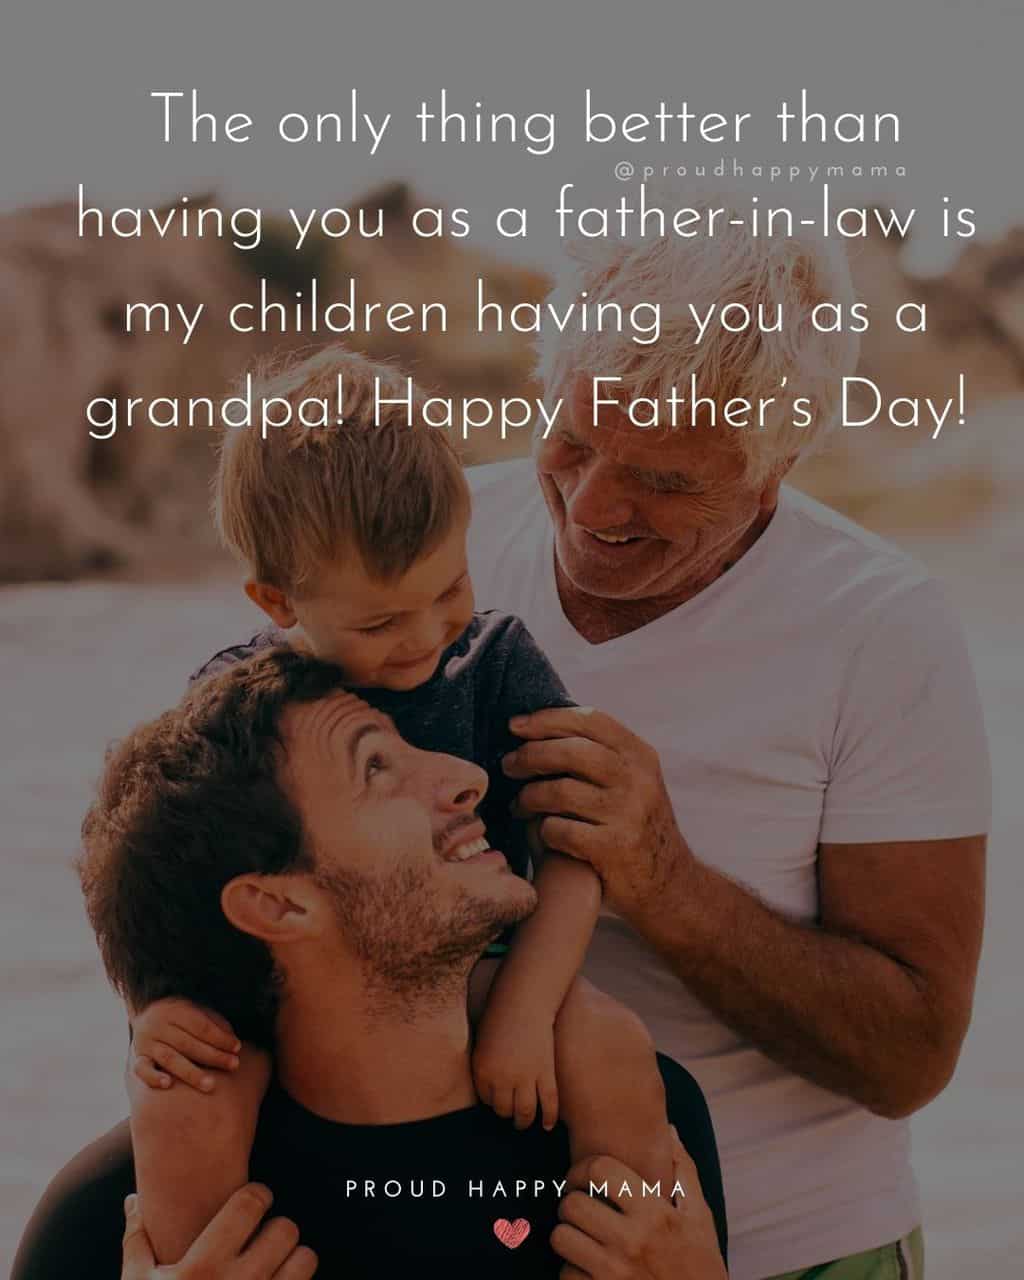 Happy Fathers Day Quotes For Father In Law - The only thing better than having you as a father in law is my children having